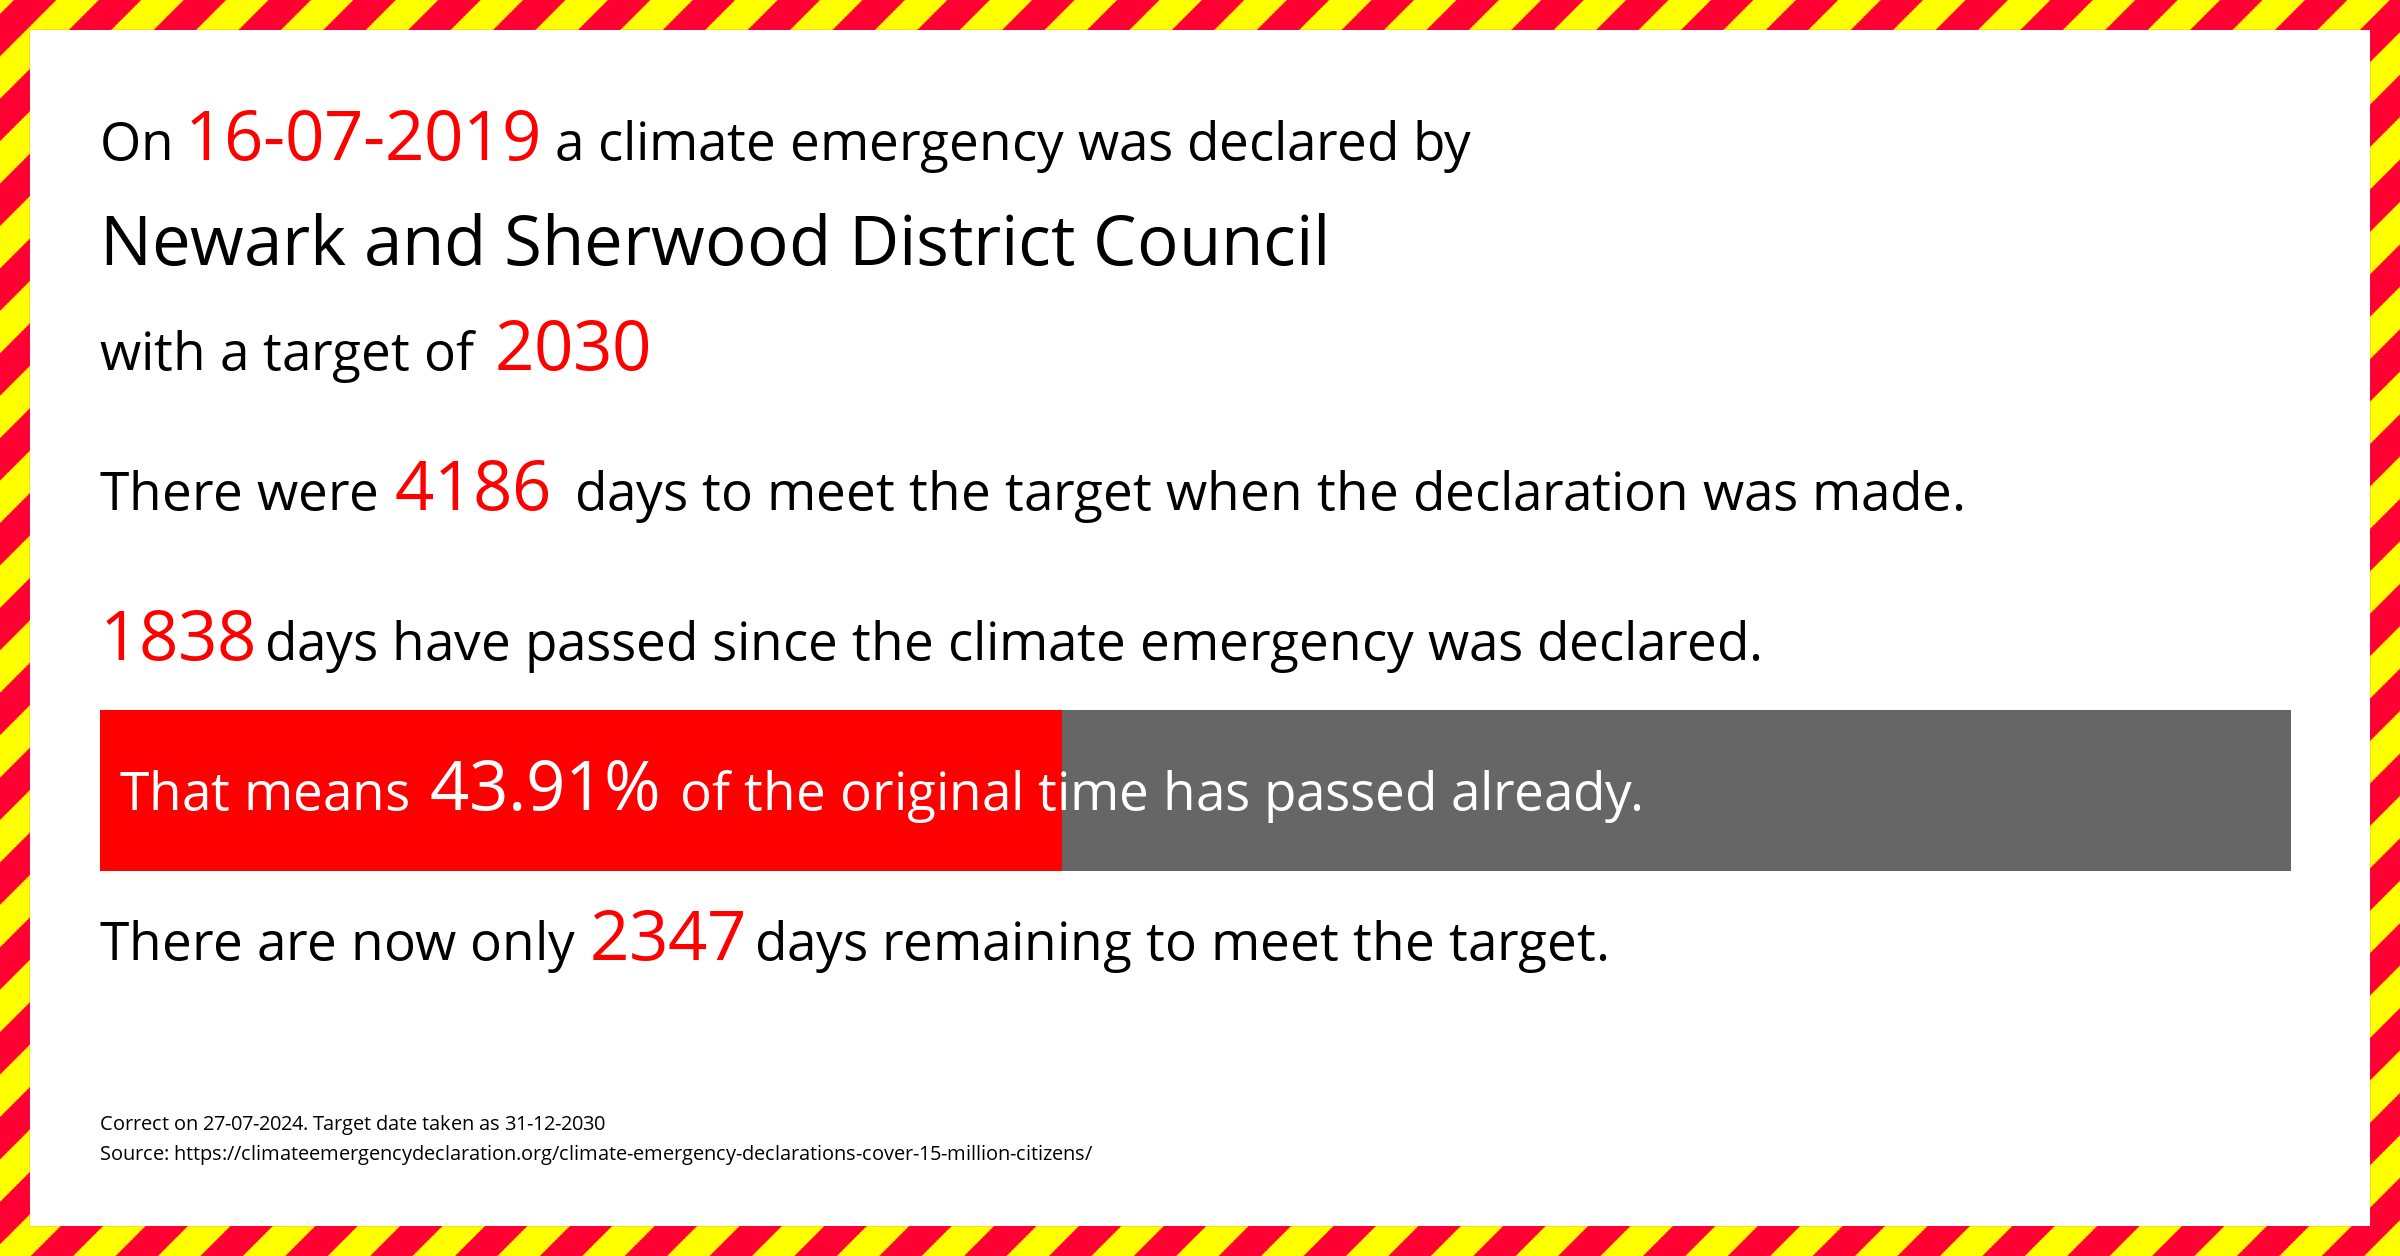 Newark and Sherwood District Council declared a Climate emergency on Tuesday 16th July 2019, with a target of 2030.